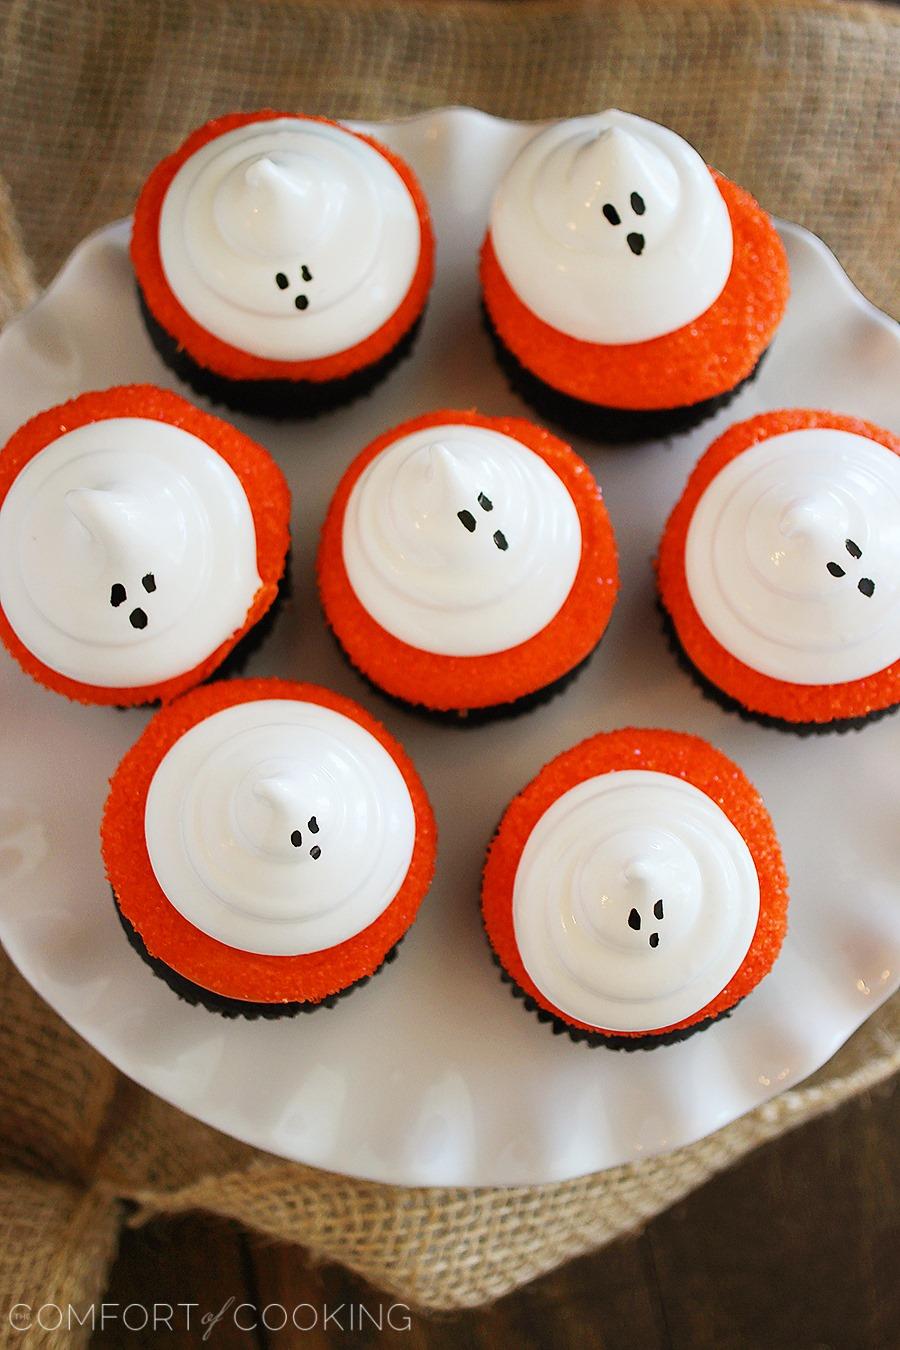 Dark Chocolate Cupcakes with Meringue Ghosts – Decadent dark chocolate cupcakes with fluffy meringue ghosts make for a scrumptious, spooky Halloween treat! | thecomfortofcooking.com